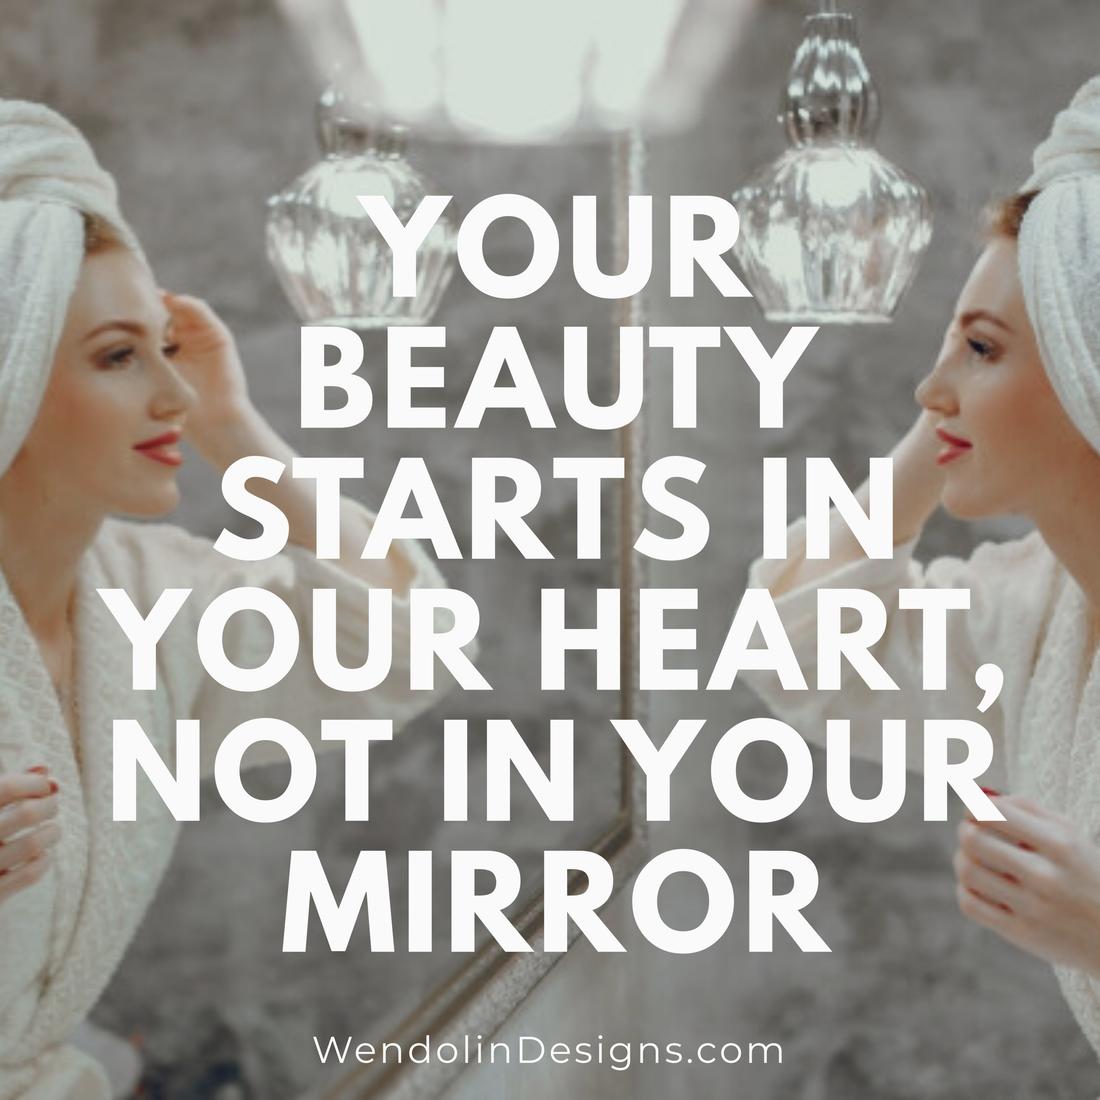 Your beauty starts in your heart, not in your mirror